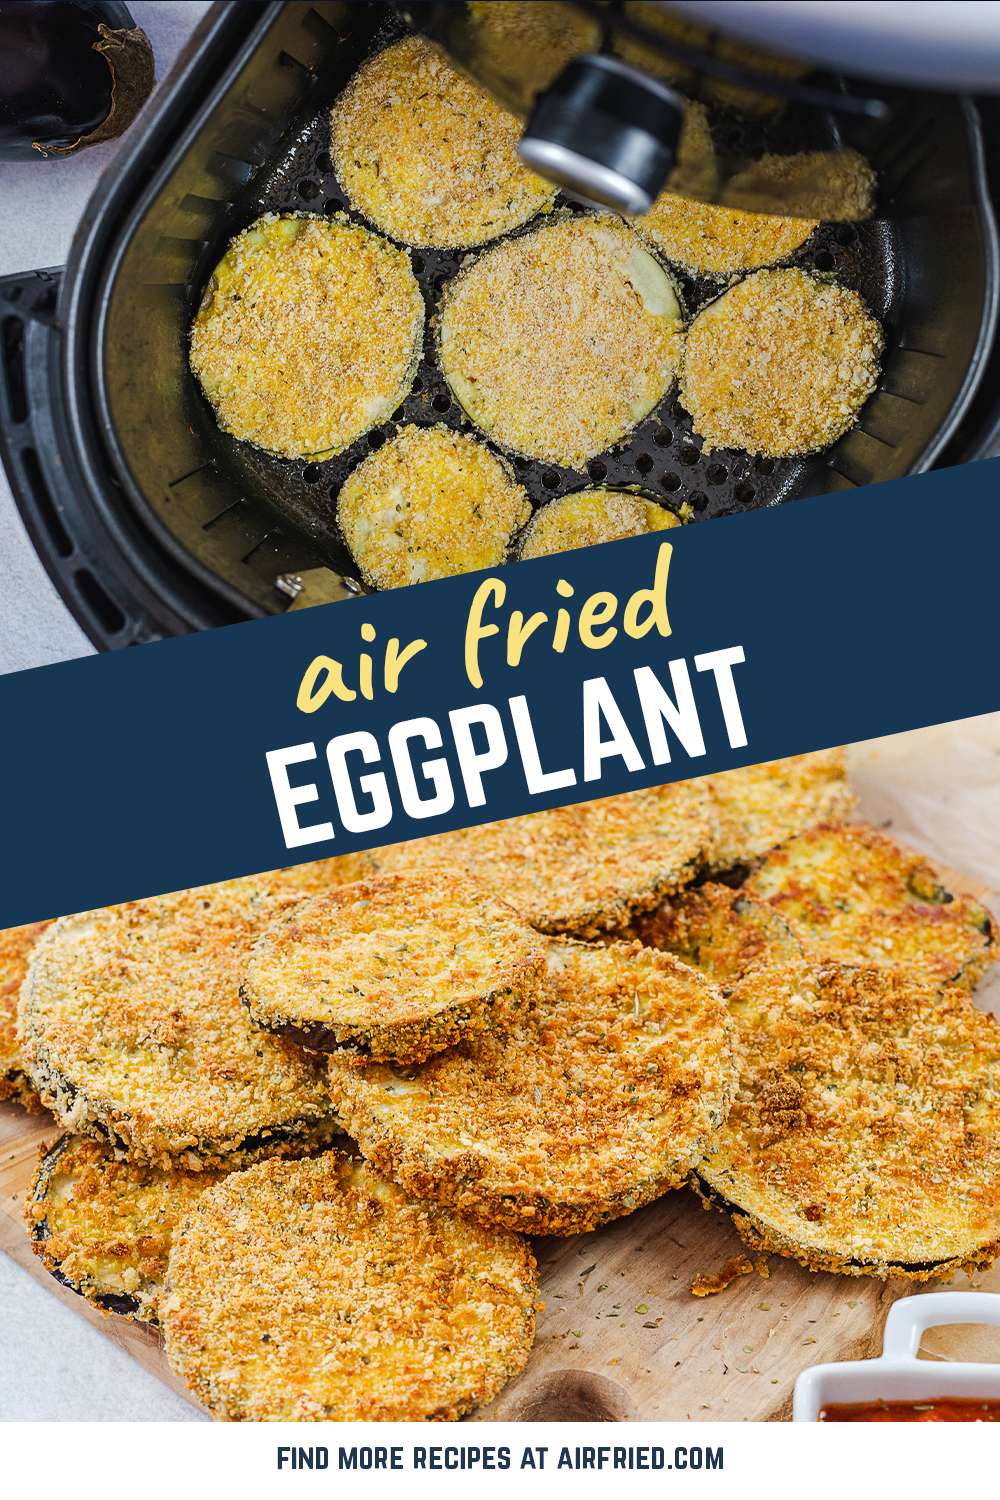 I love these big eggplant slices fried crispy in my air fryer!  They are a great snack or appetizer!